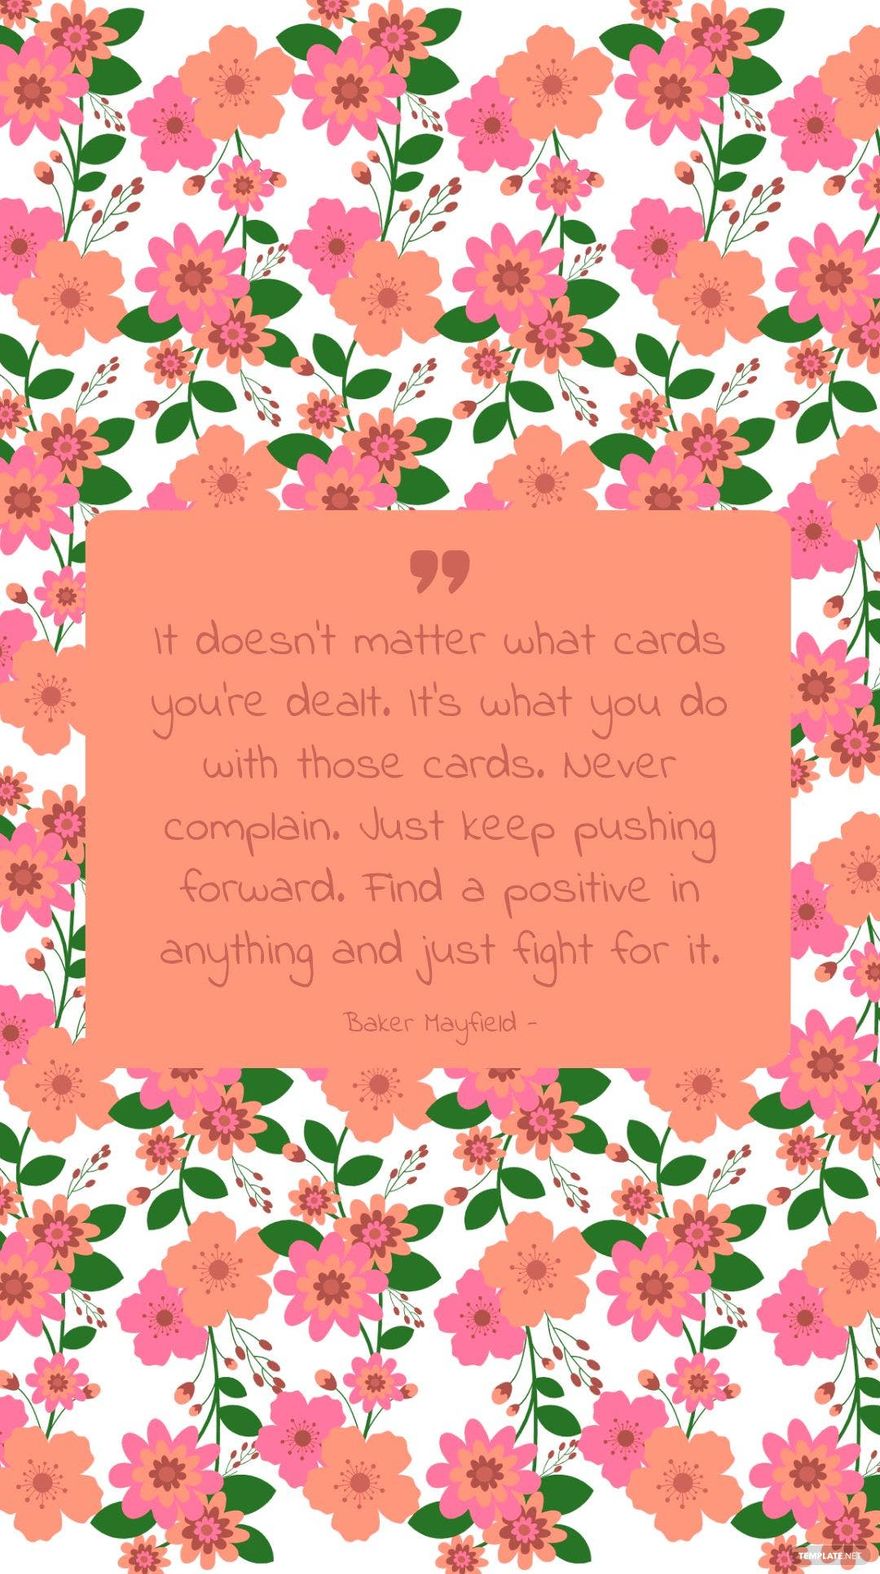 Baker Mayfield - It doesn’t matter what cards you’re dealt. It’s what you do with those cards. Never complain. Just keep pushing forward. Find a positive in anything and just fight for it.